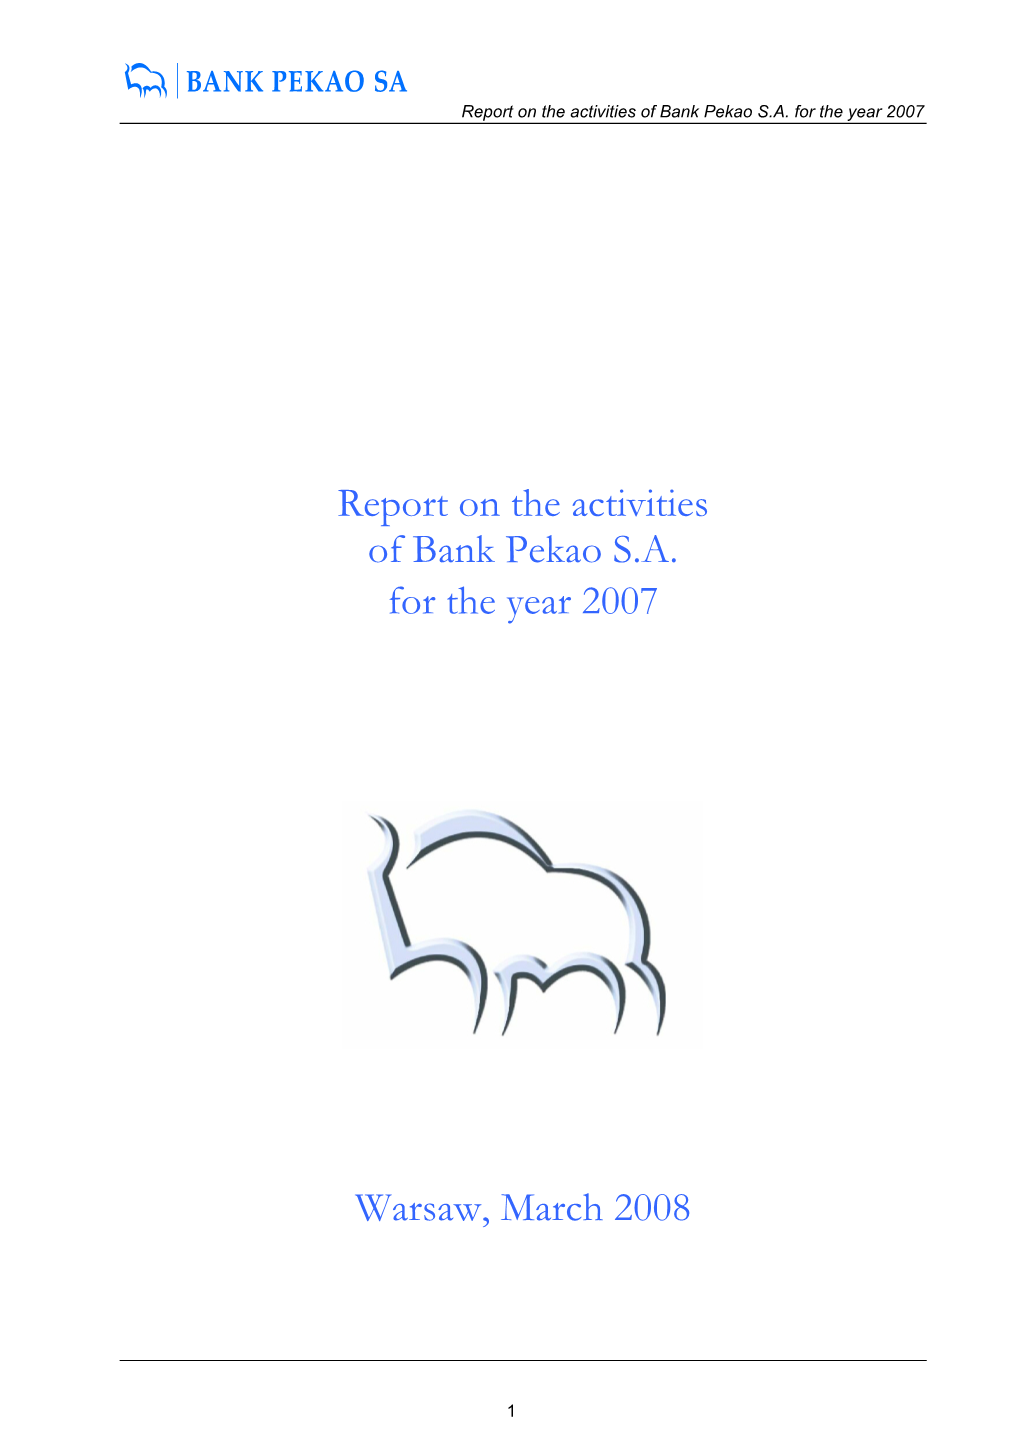 Report on the Activities of Bank Pekao SA for the Year